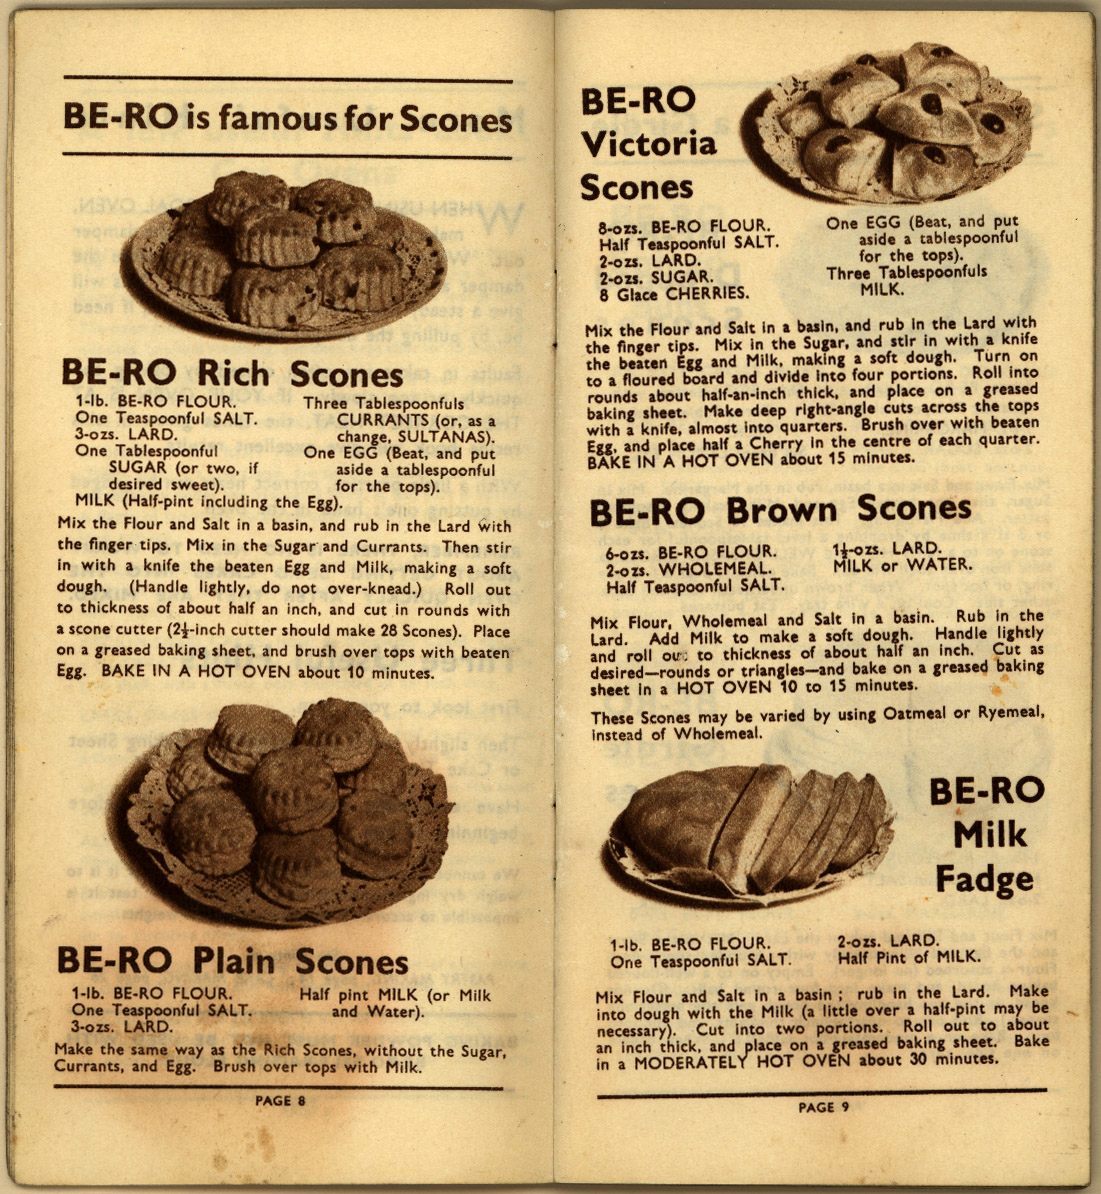 Be-Ro Home Recipes: Scones, Cakes, Pastry, Puddings – A 1923 Cookbook